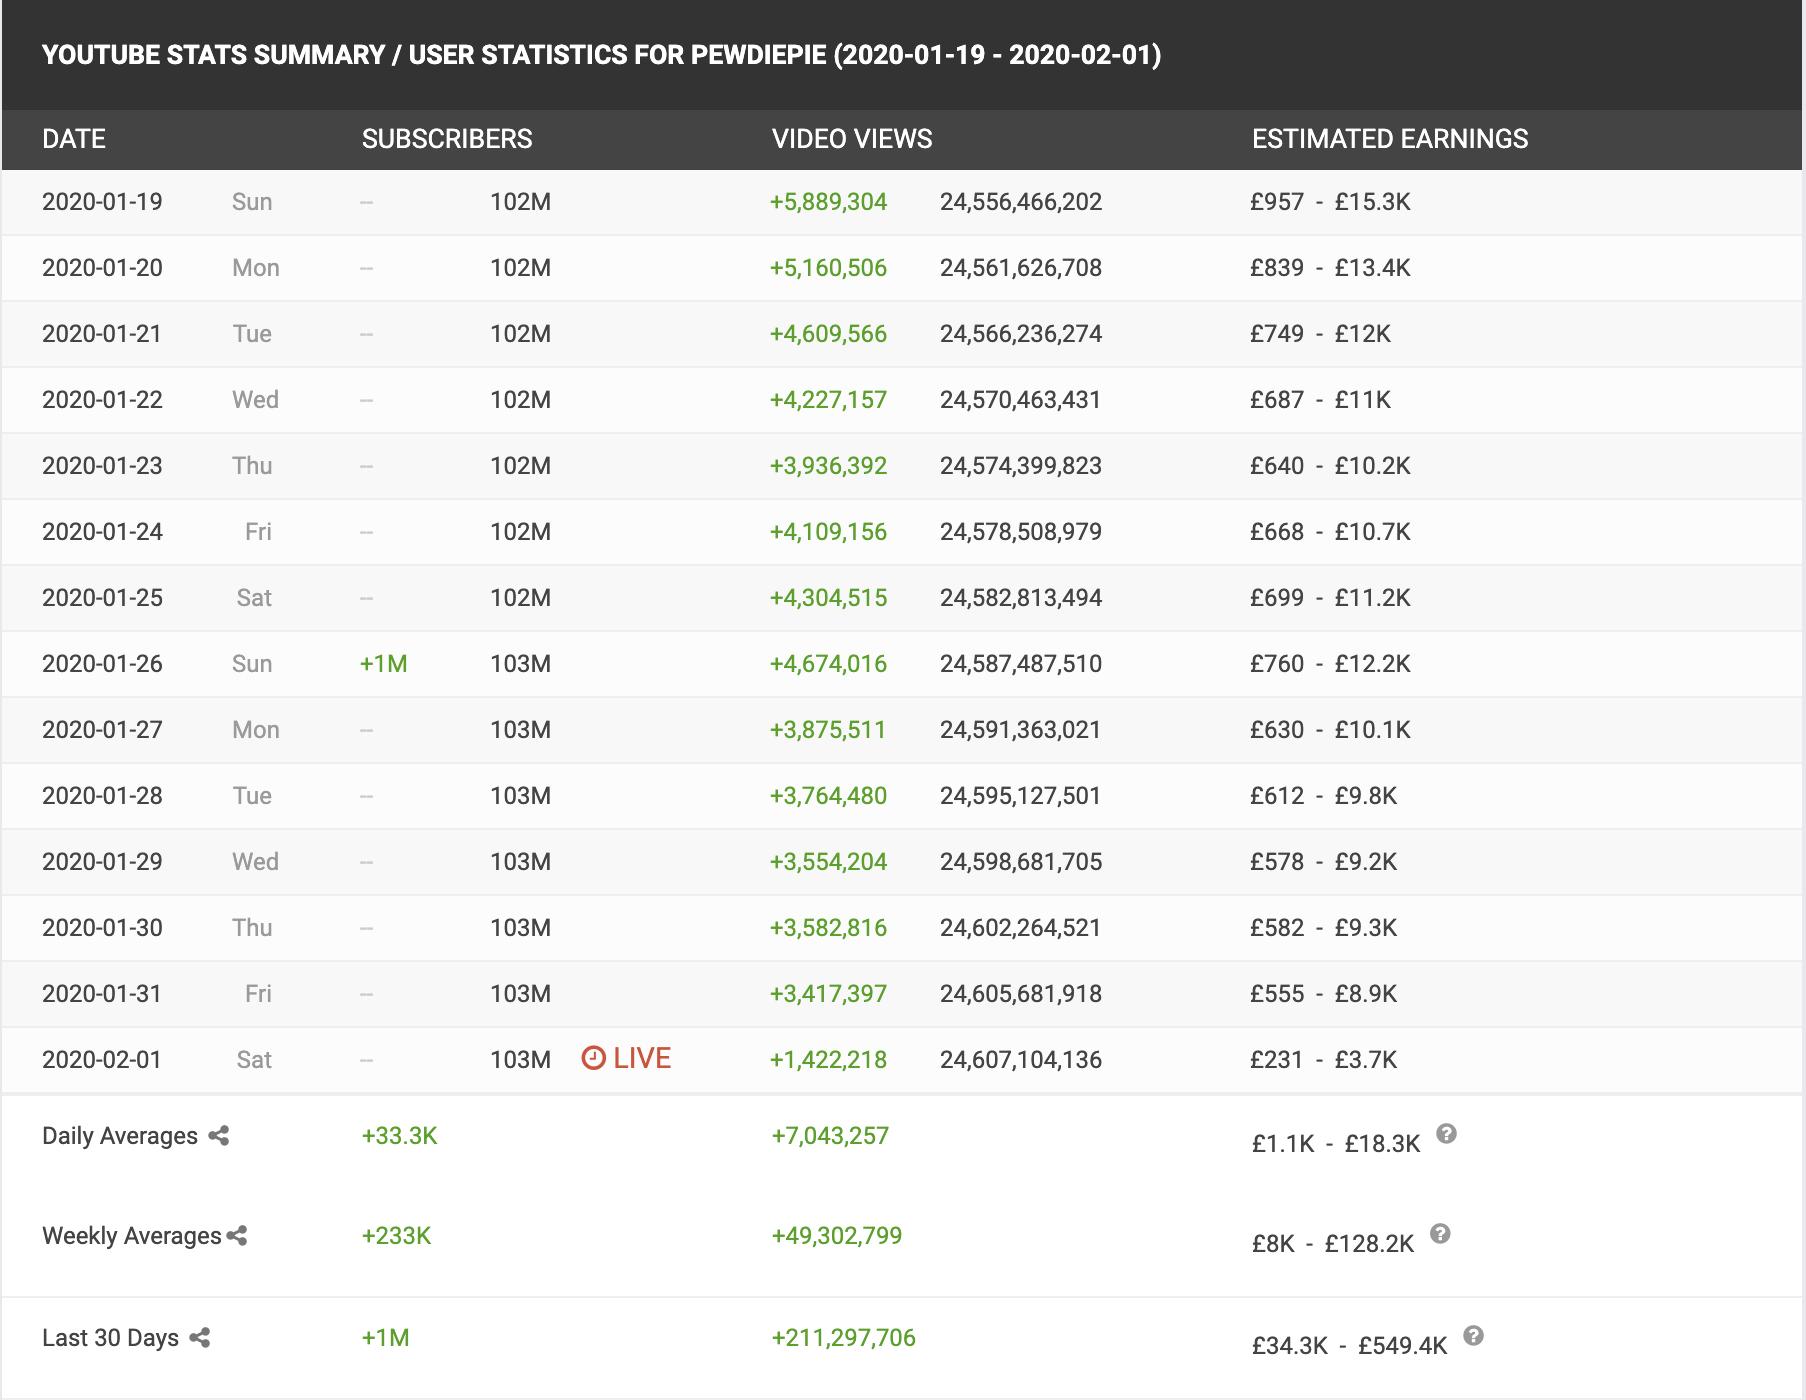 PewDiePie's YouTube channel is still gaining subs by the day.